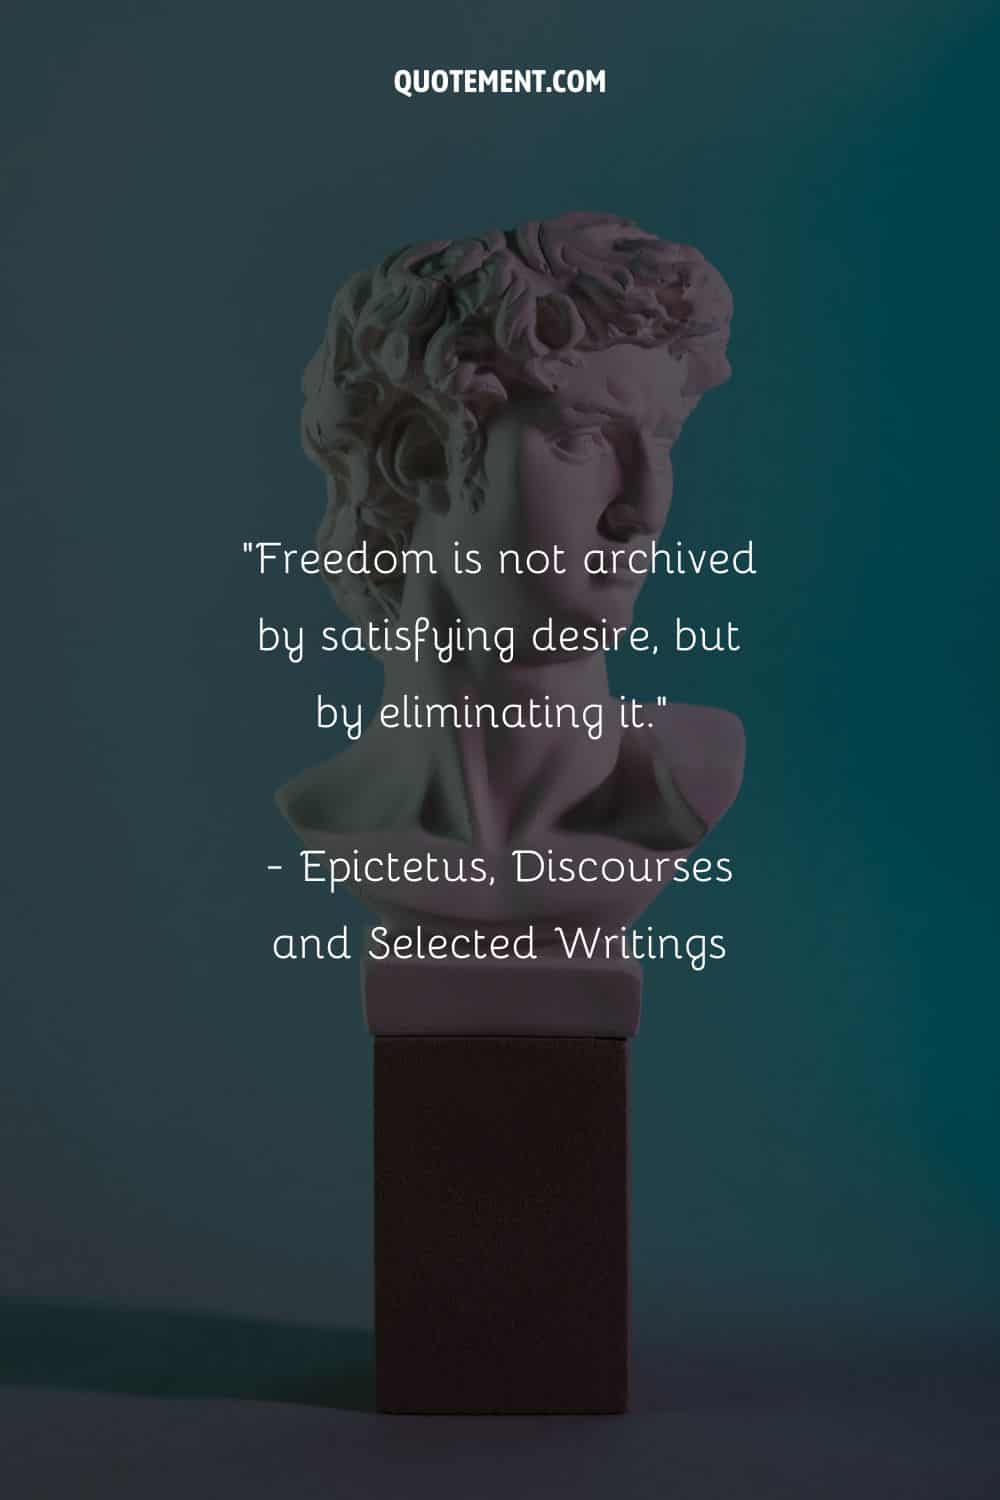 Freedom is not archived by satisfying desire, but by eliminating it.